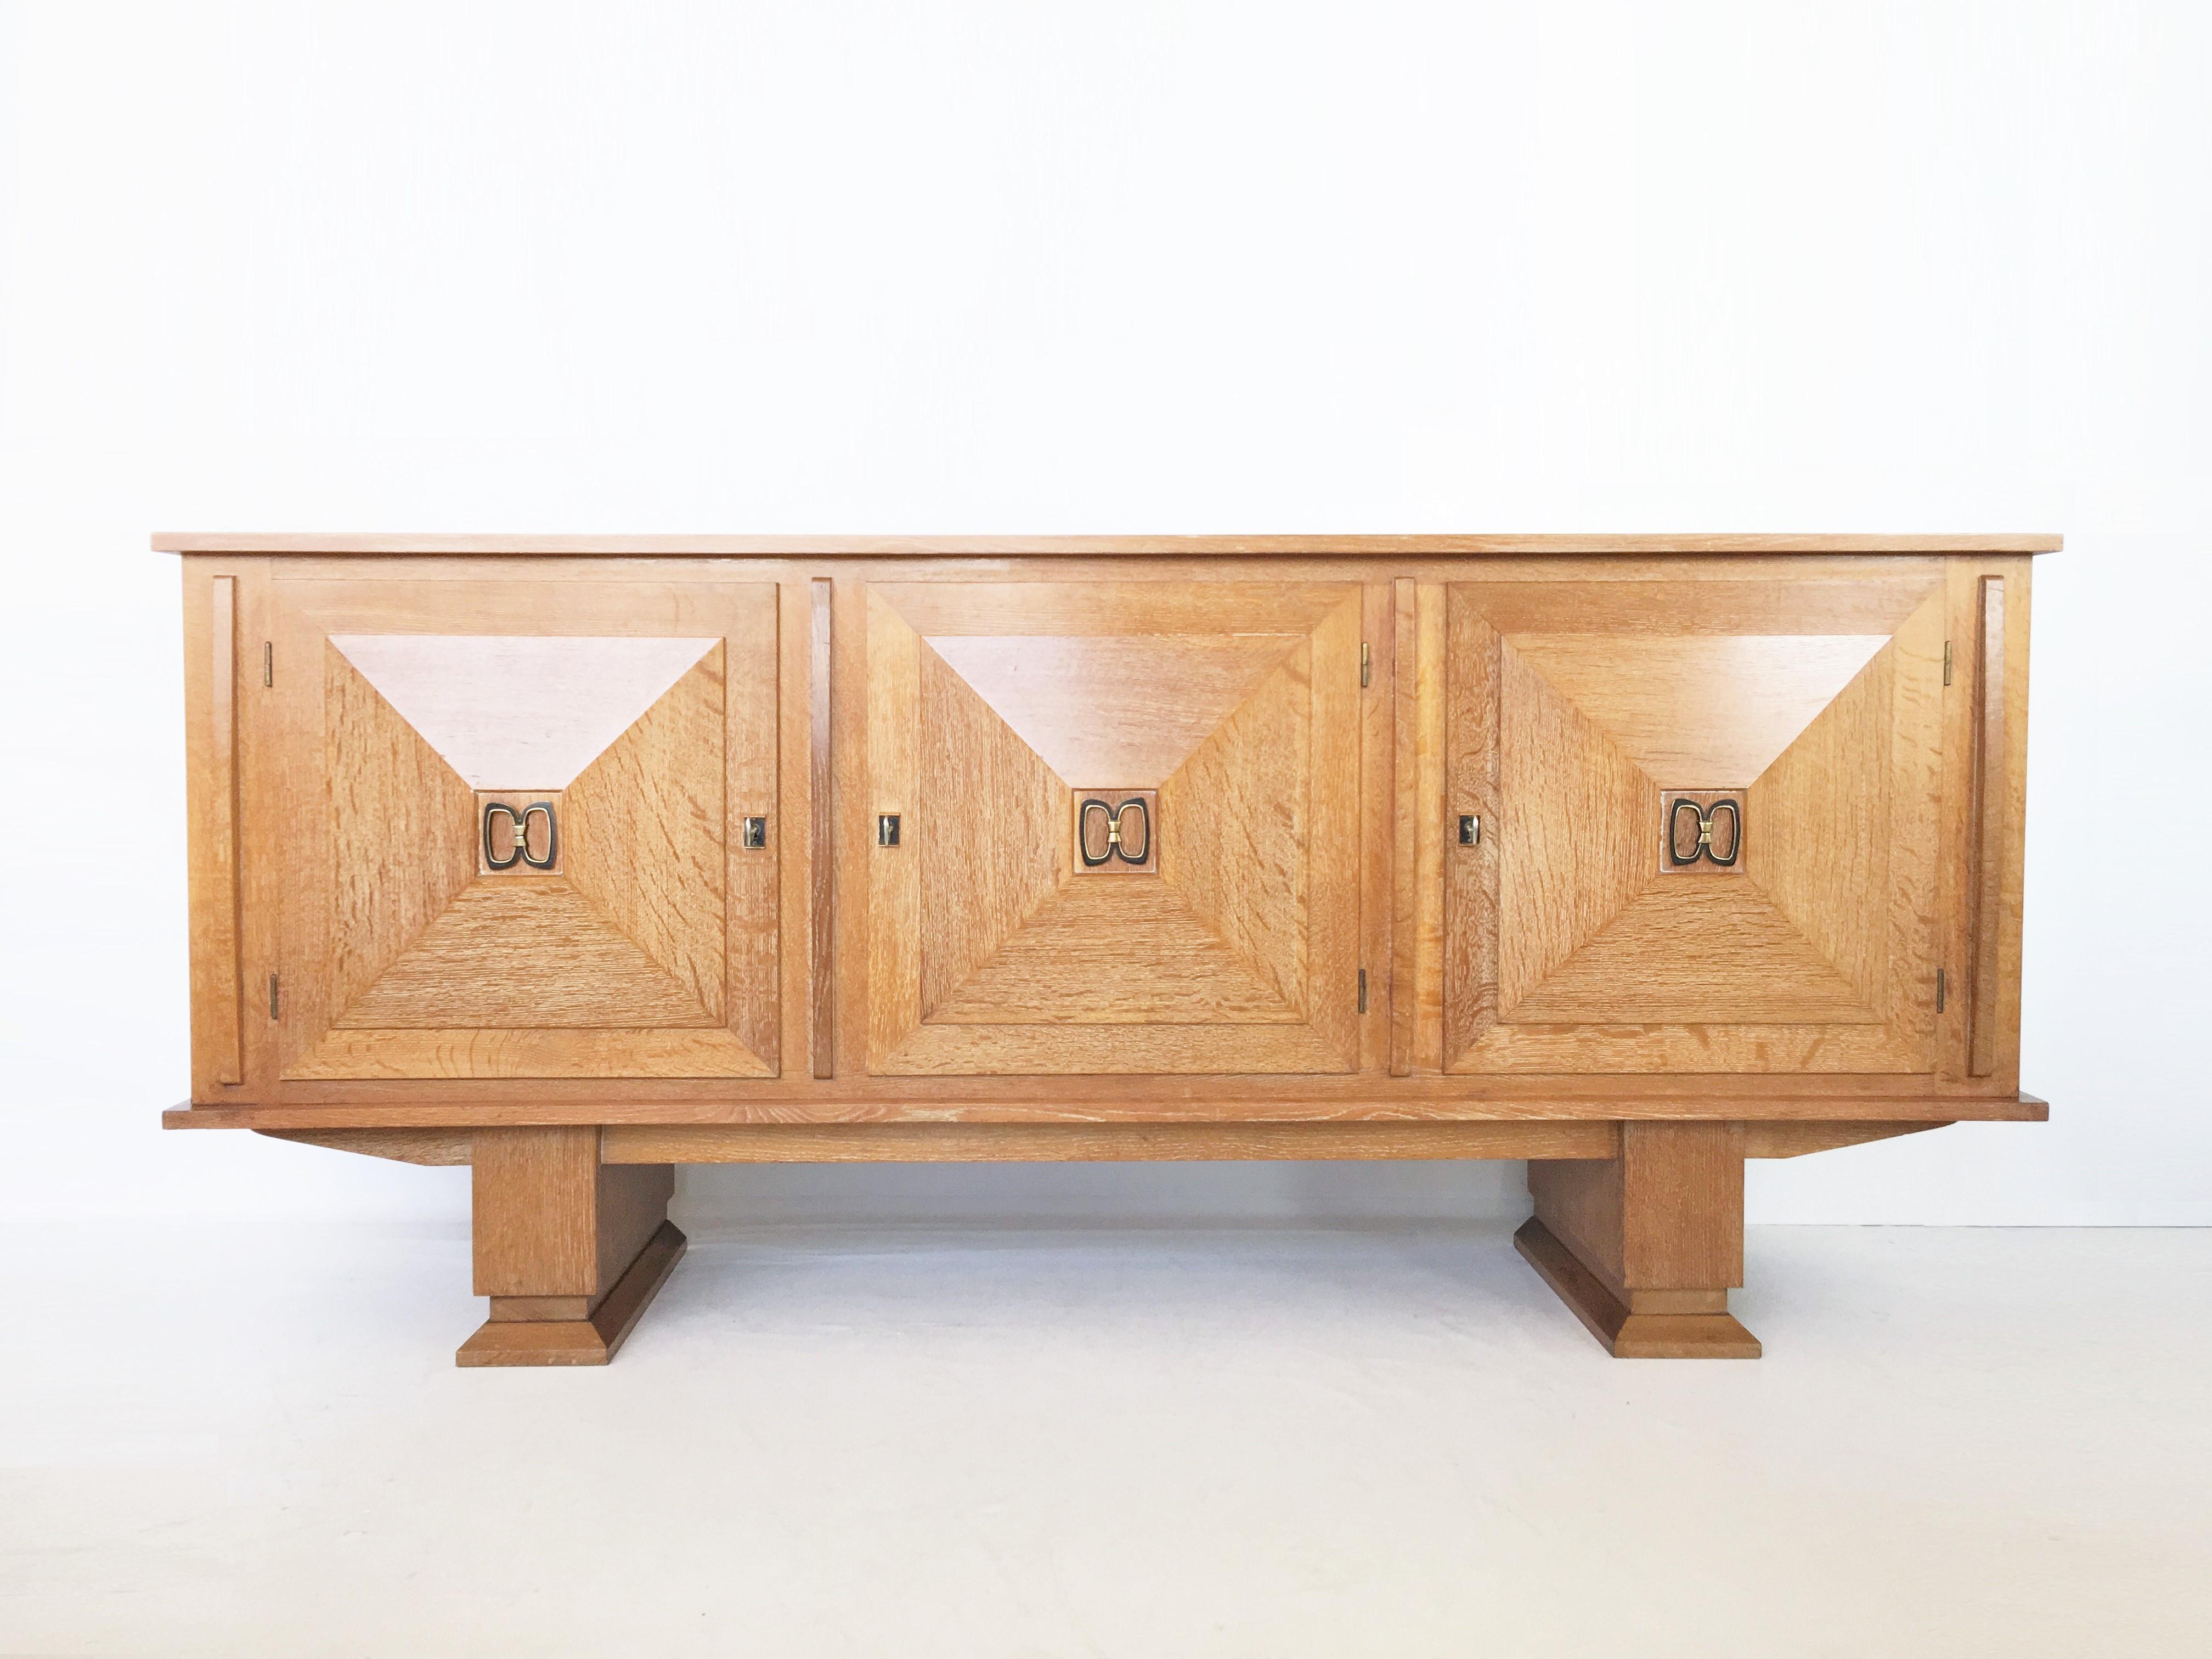 High quality craftsmanship, French Art Deco sideboard or credenza in cerused oak. Sturdy sideboard with two sculptural legs which gives this credenza a floating appearance. Three doors, all with beautifully designed wooden graphical patterns with